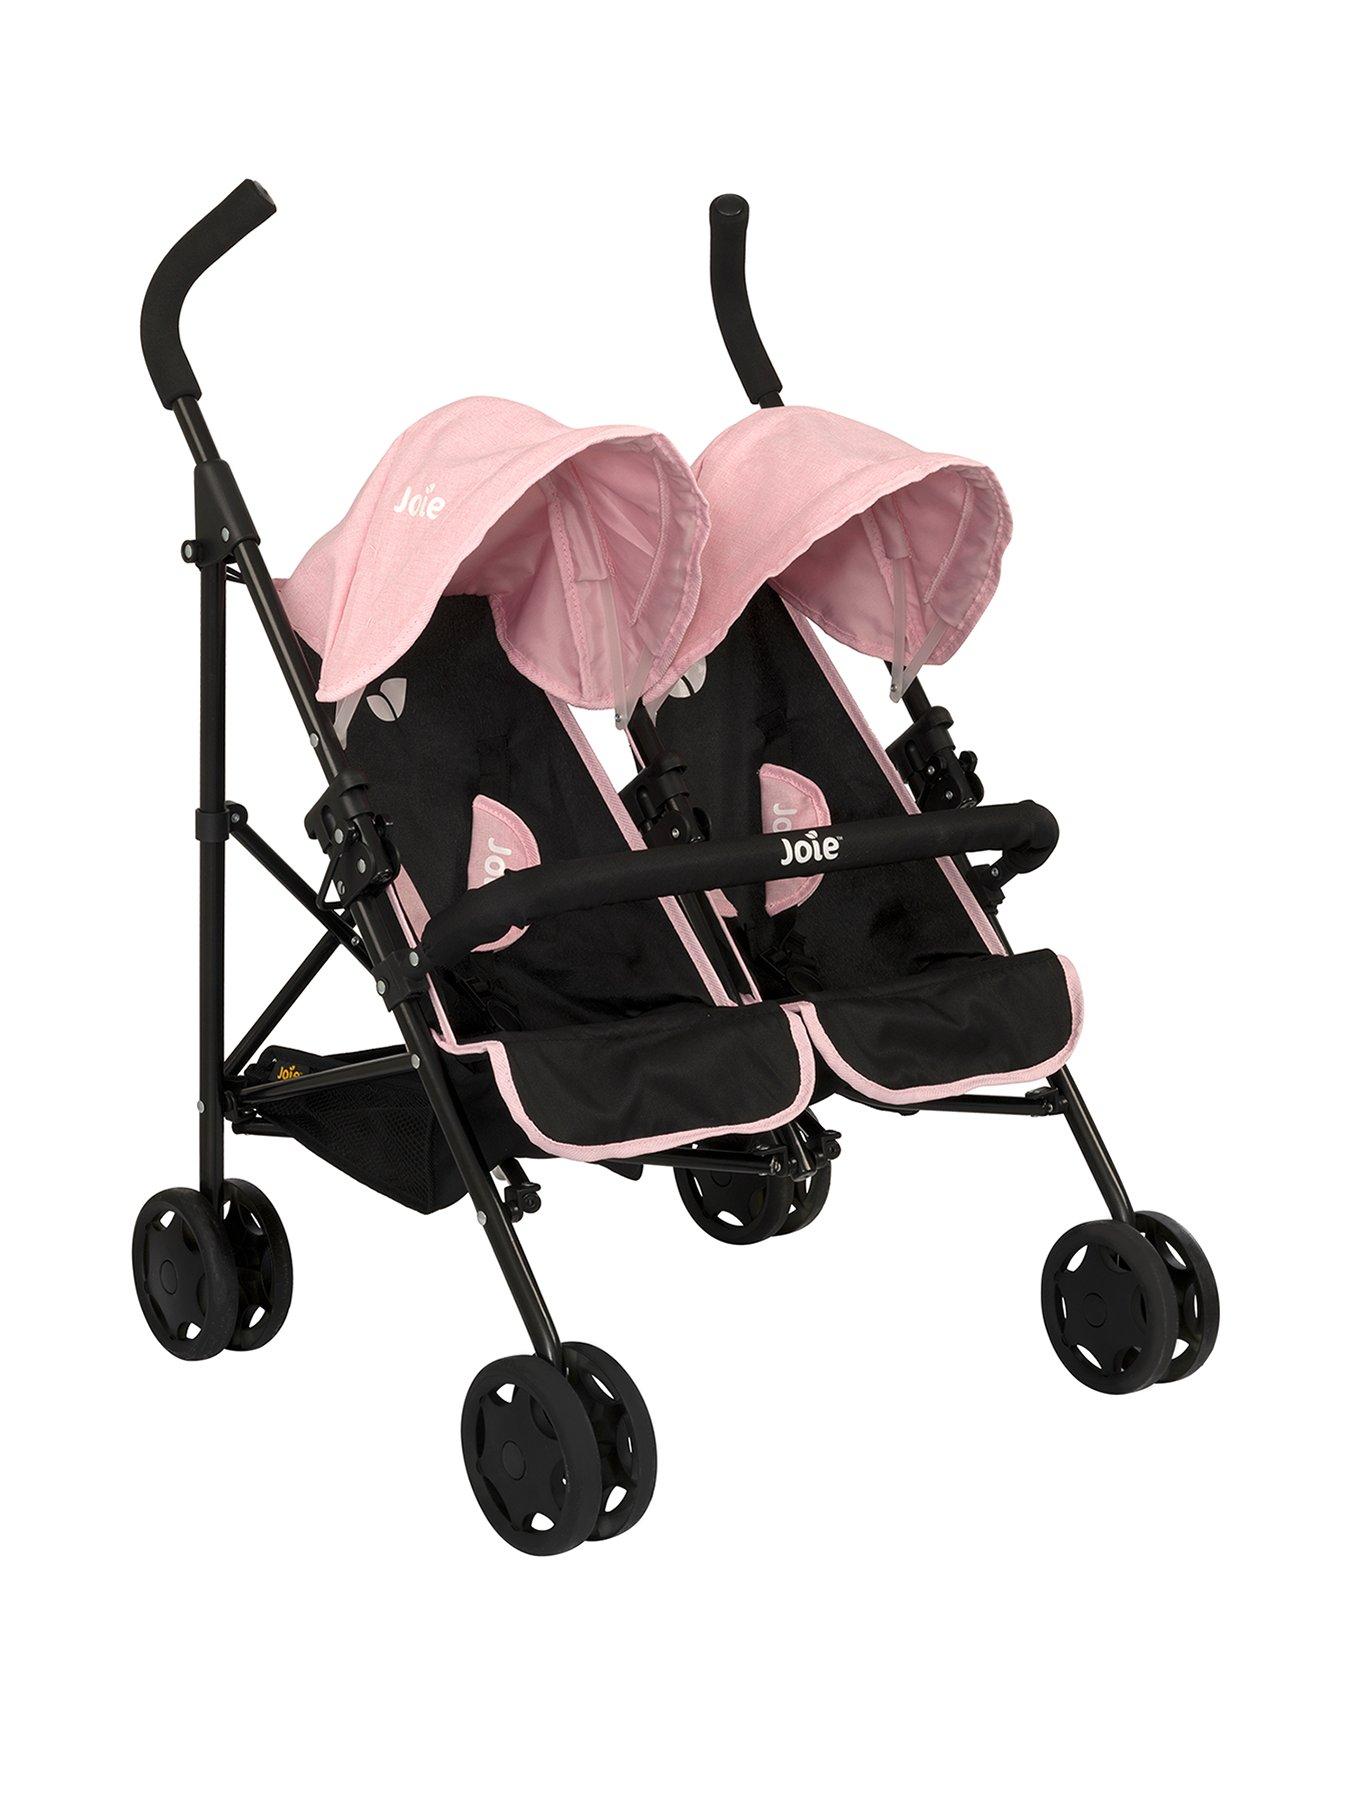 dolls double pram for 8 to 12 years